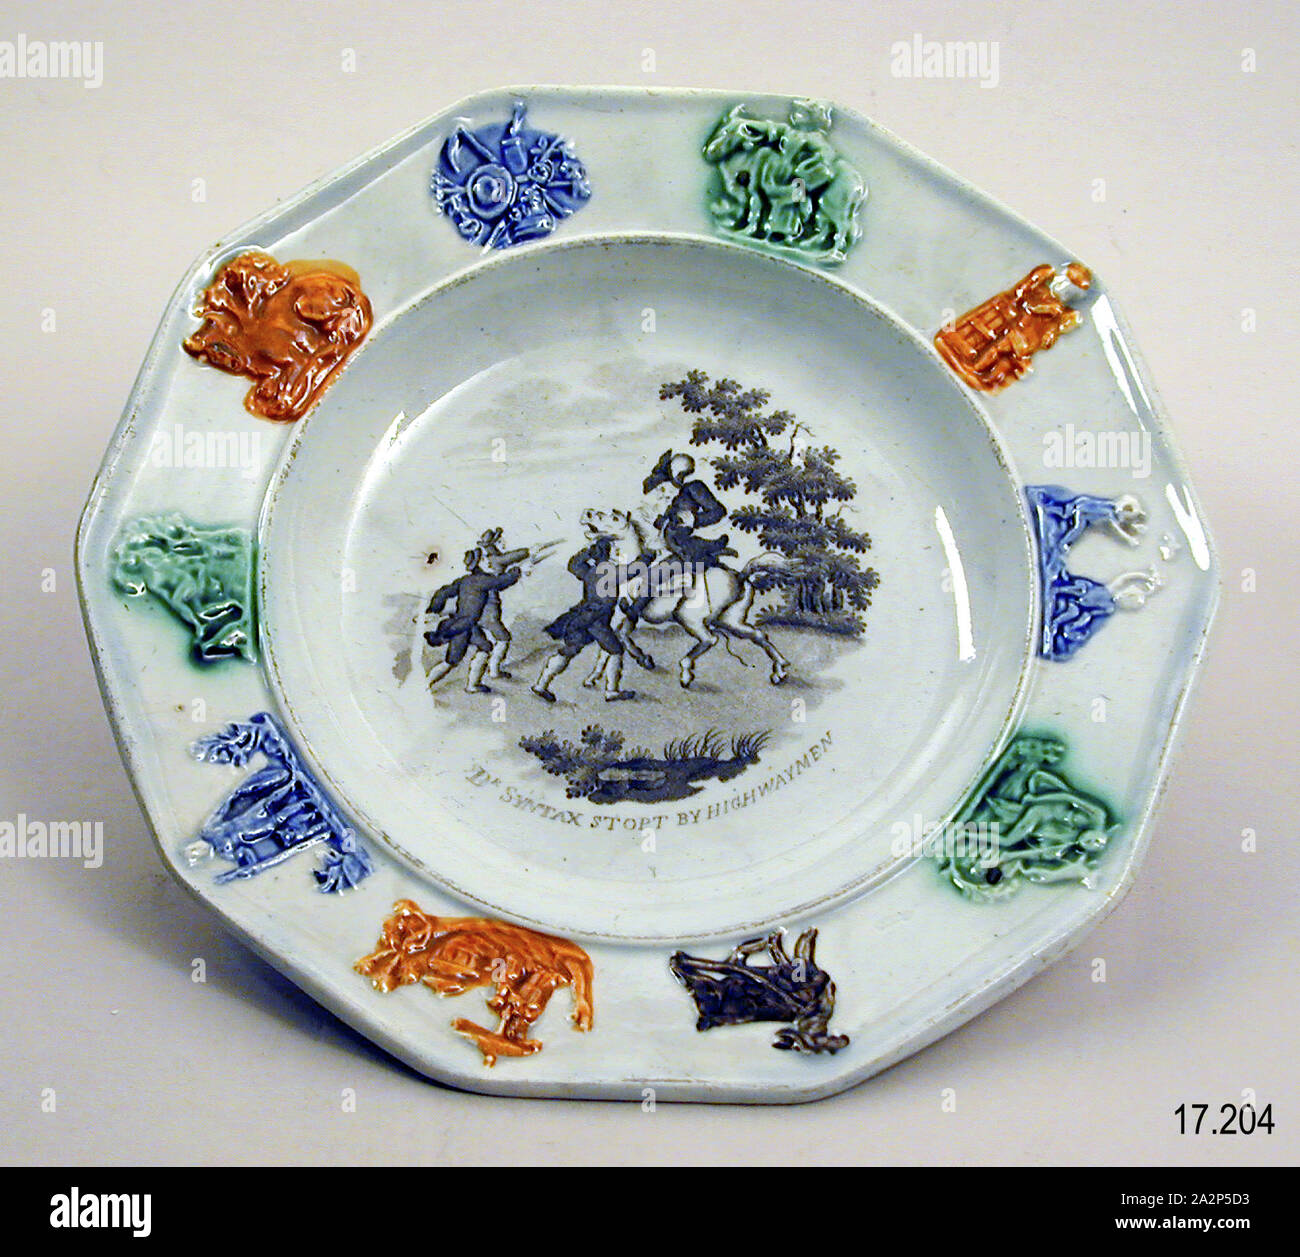 Dr. Syntax Stopt by Highwaymen Plate, 19th Century, Transfer-printed glazed earthenware, 1 x 8 x 7 3/4 in. (2.5 x 20.3 x 19.7 cm Stock Photo